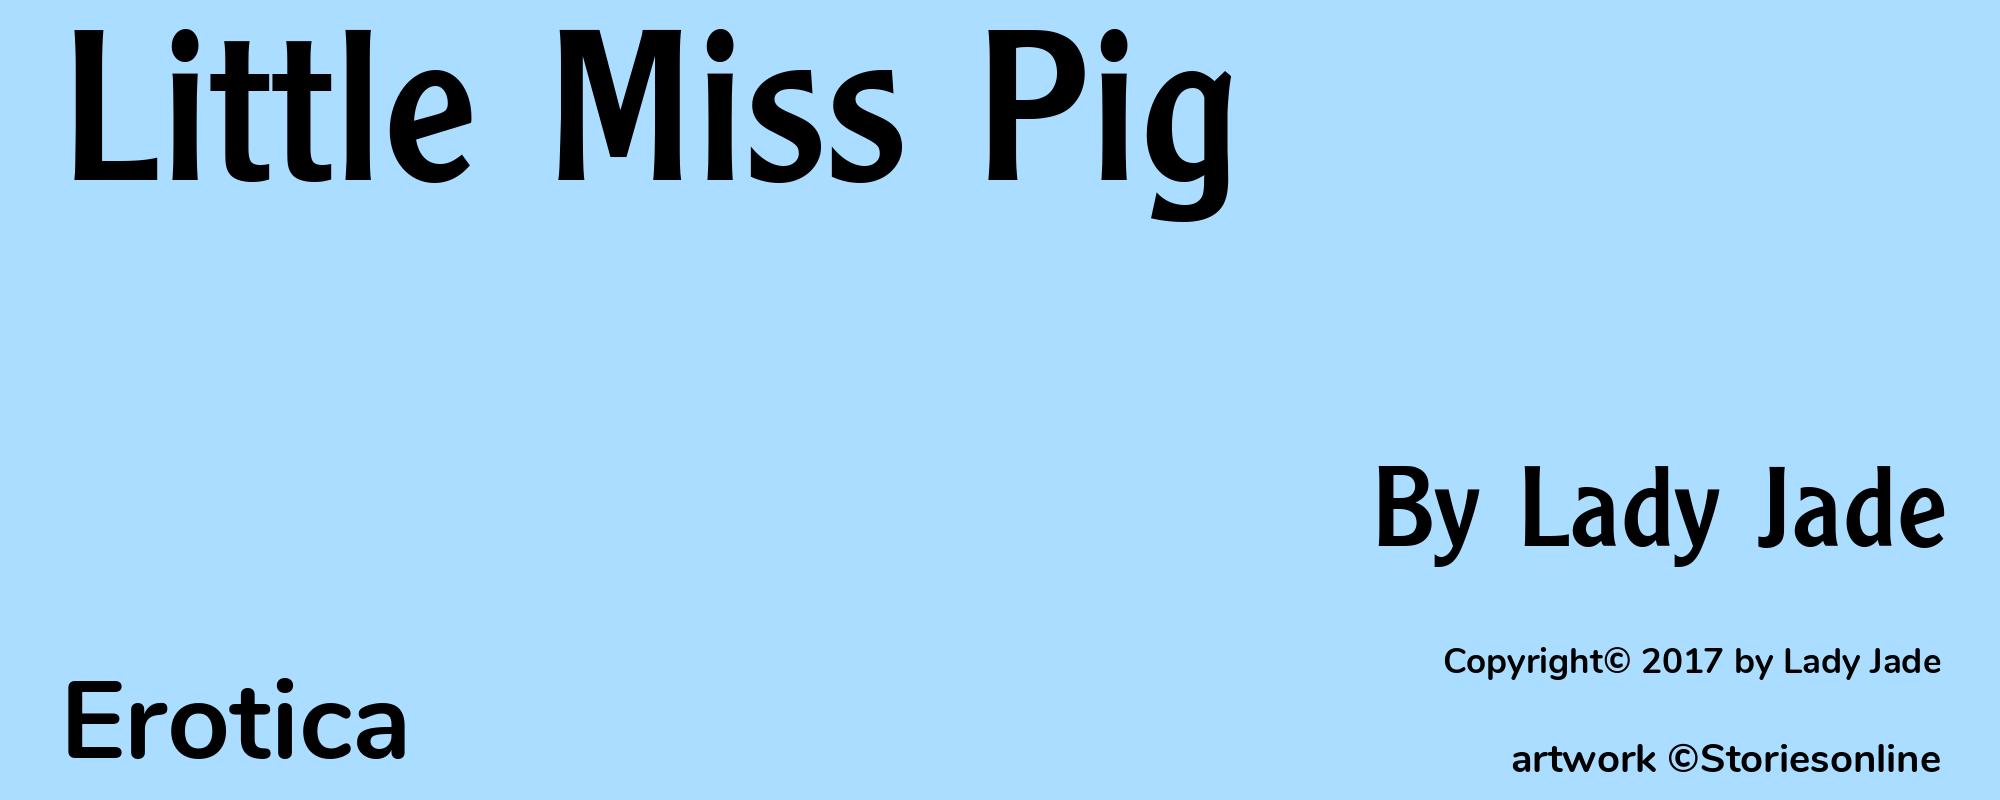 Little Miss Pig - Cover